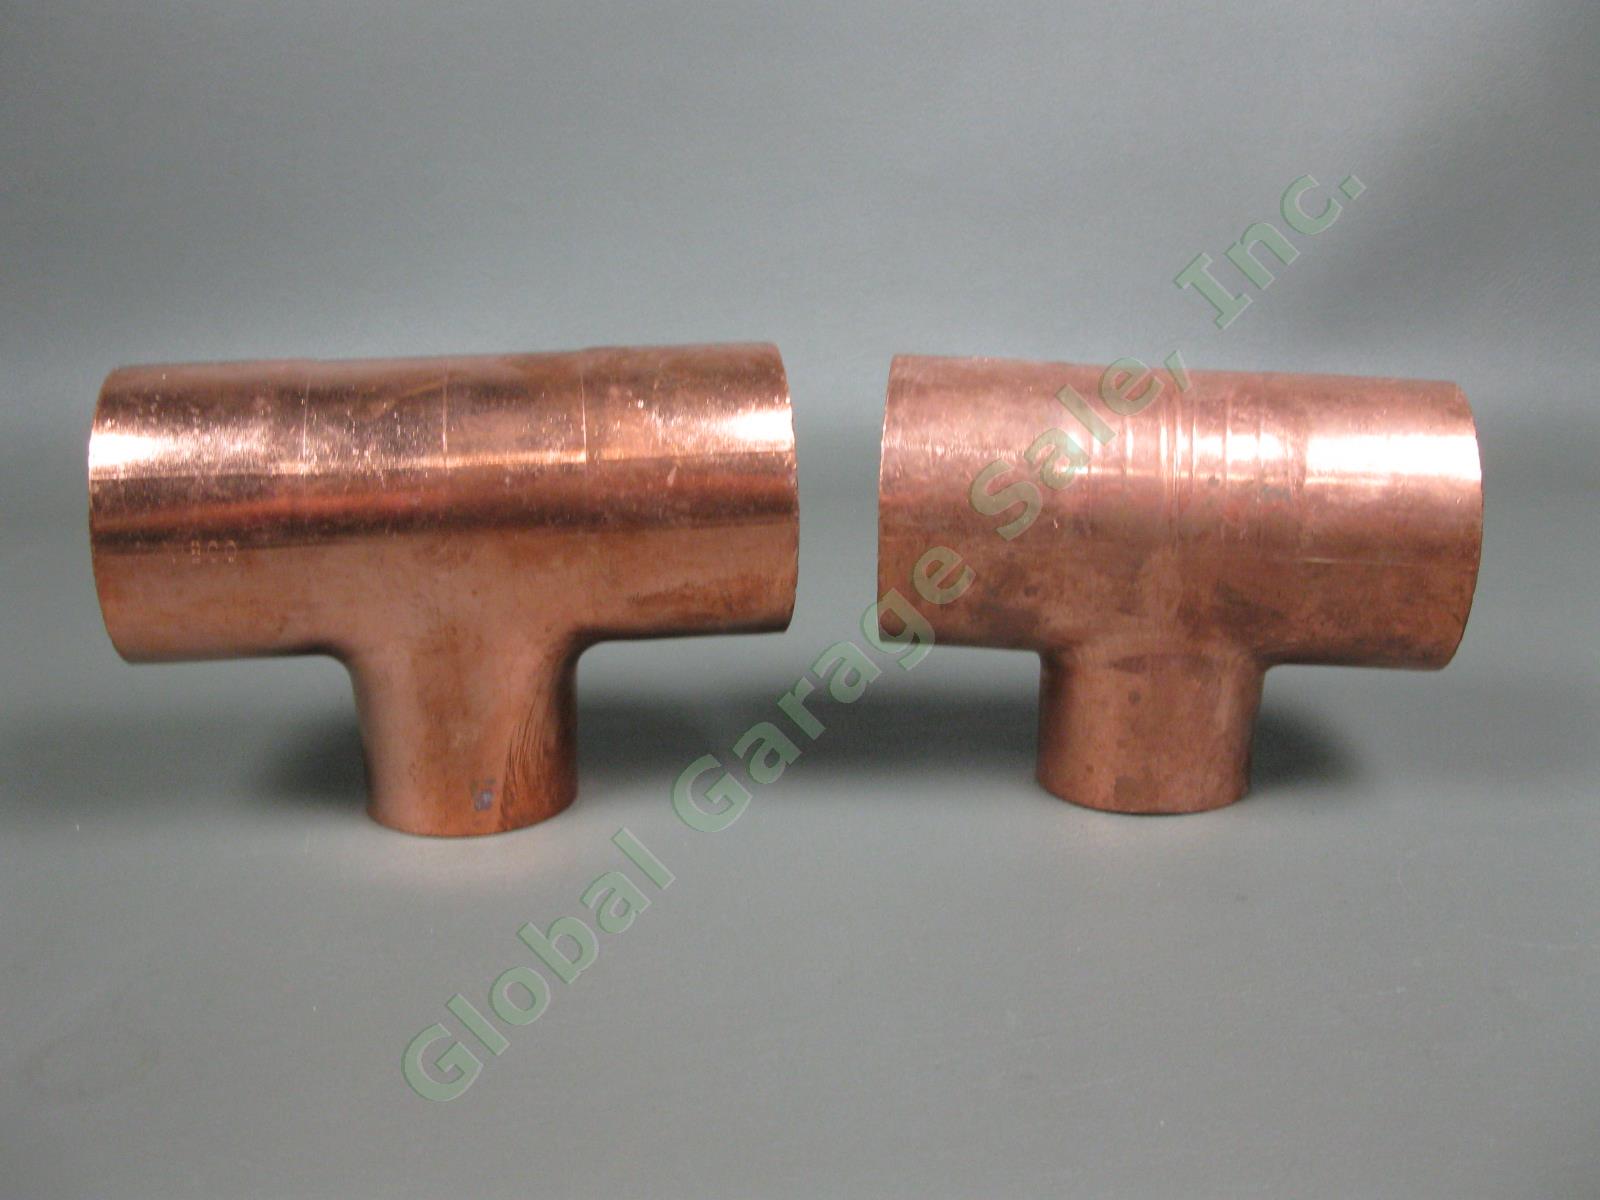 2 NEW Nibco 2" x 2" x 1-1/2" Copper EPC Reducing Sweat Tees Pipe Fittings Pair